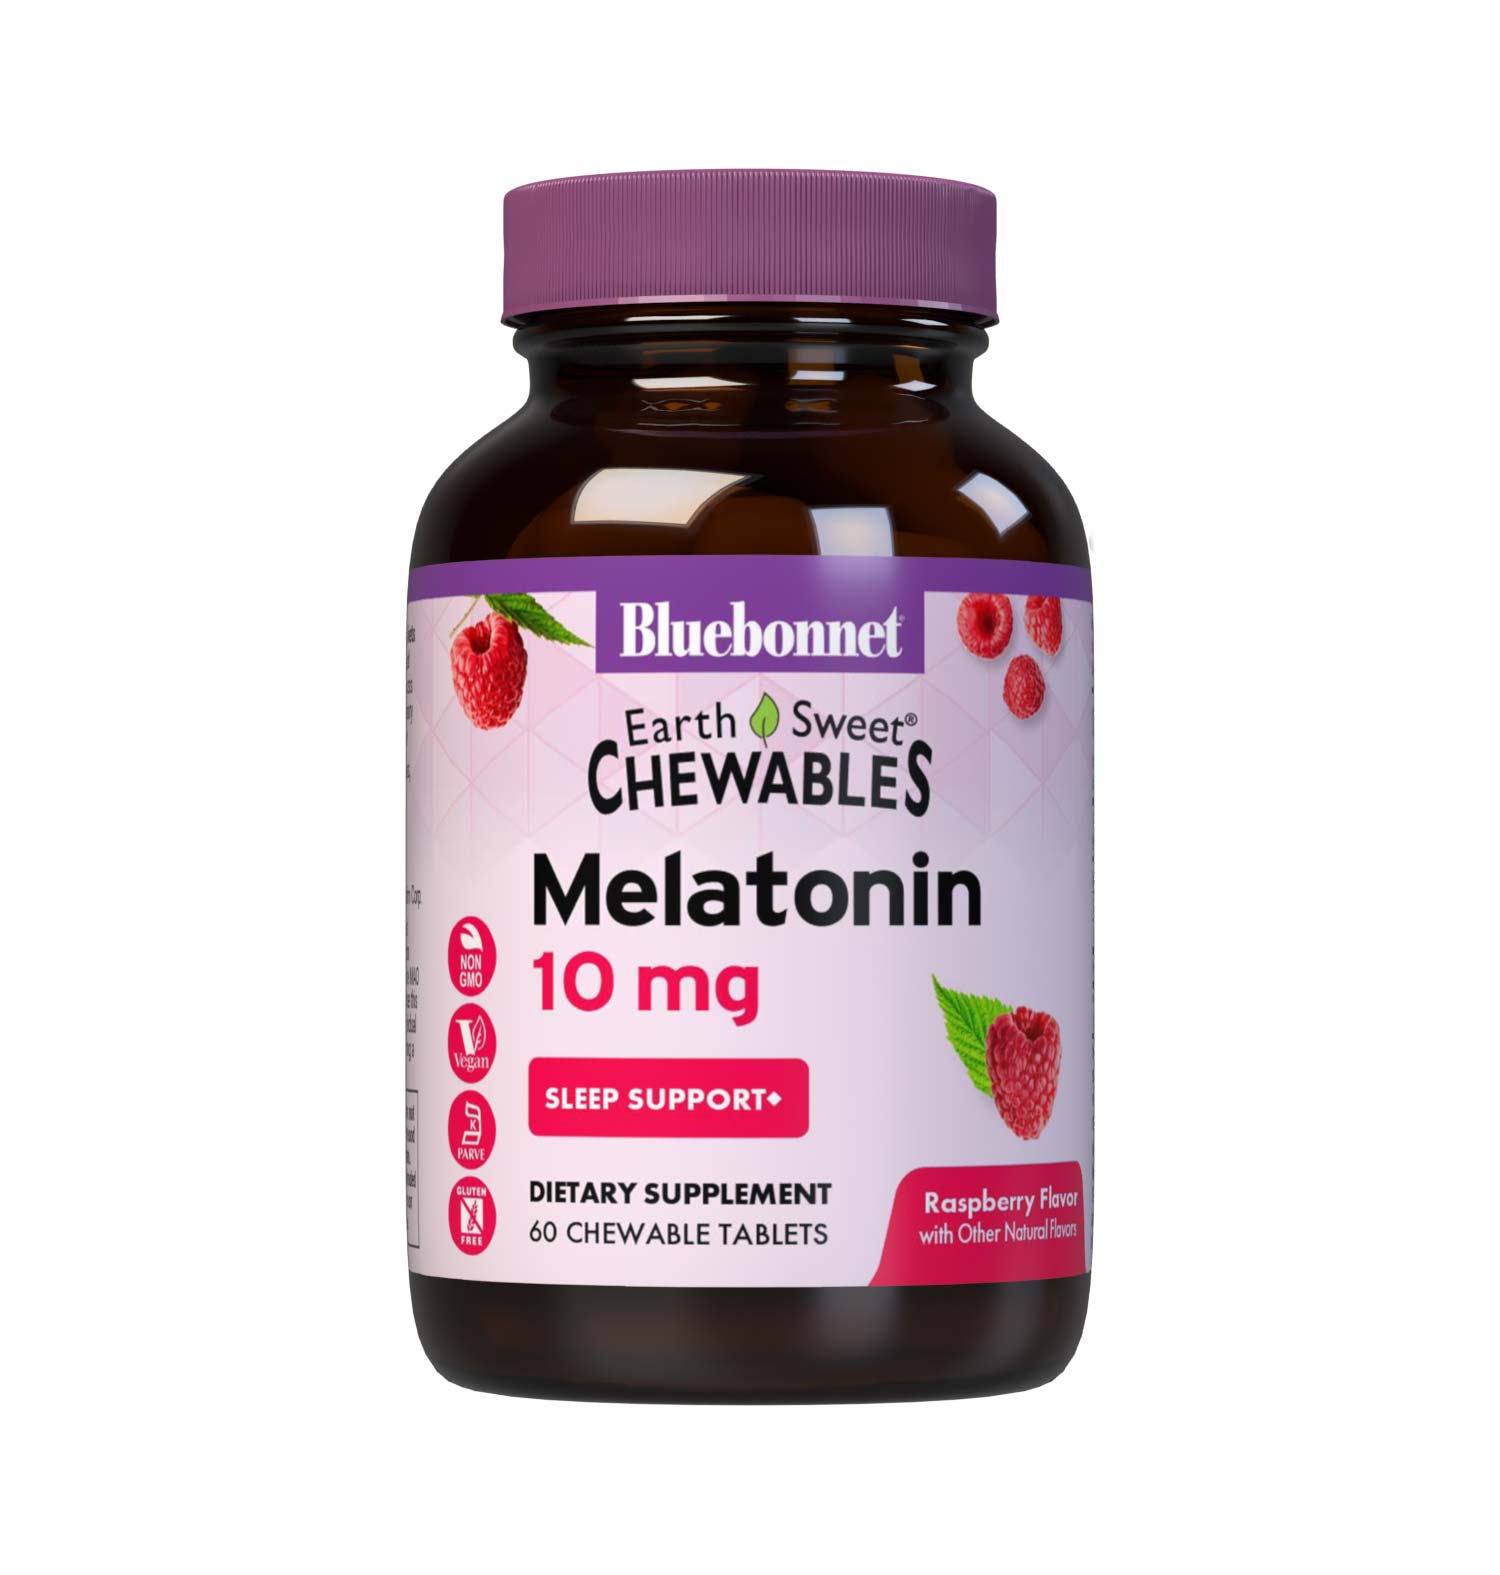 Bluebonnet’s EarthSweet Chewables Melatonin 10 mg 60 Tablets help minimize occasional sleeplessness for those affected by disturbed sleep/wake cycles, such as those traveling across multiple time zones. This product is sweetened with EarthSweet, a proprietary mix of fruit powders and sugar cane crystals. #size_60 count